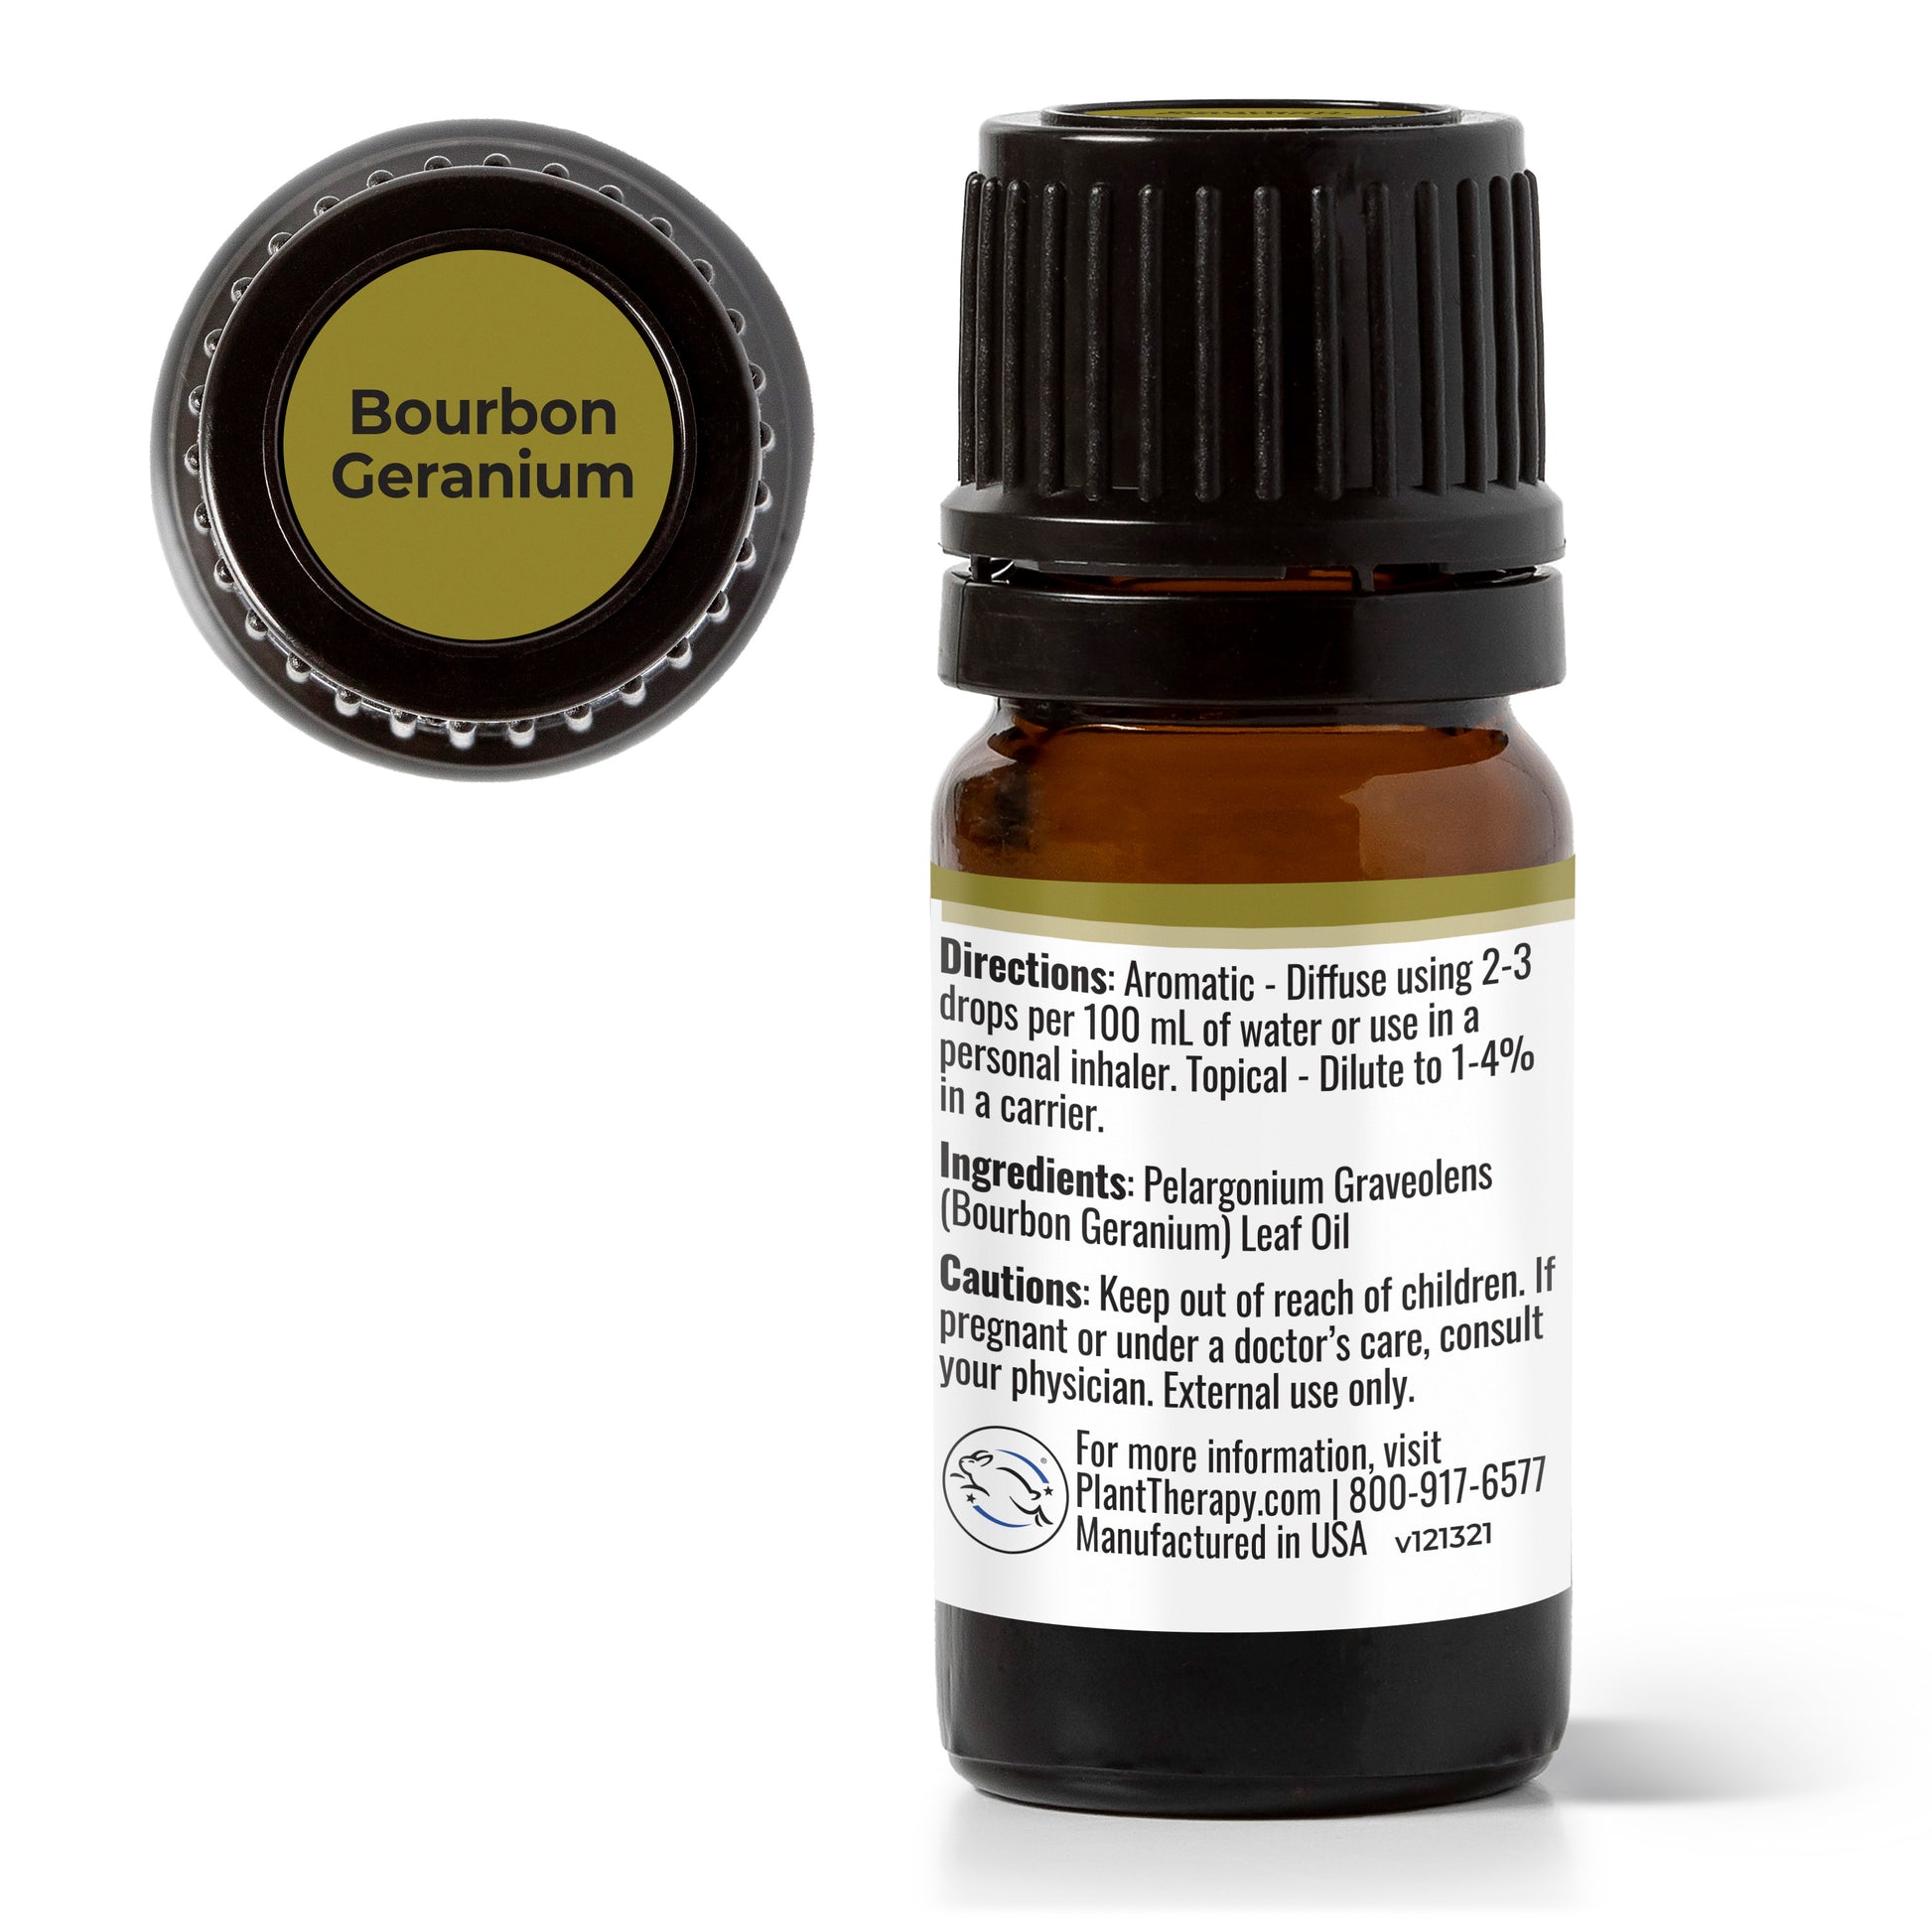 Floral Essential Oils 100% Pure Undiluted Essential Oil for Aromatherapy  5ml or 10 Ml 